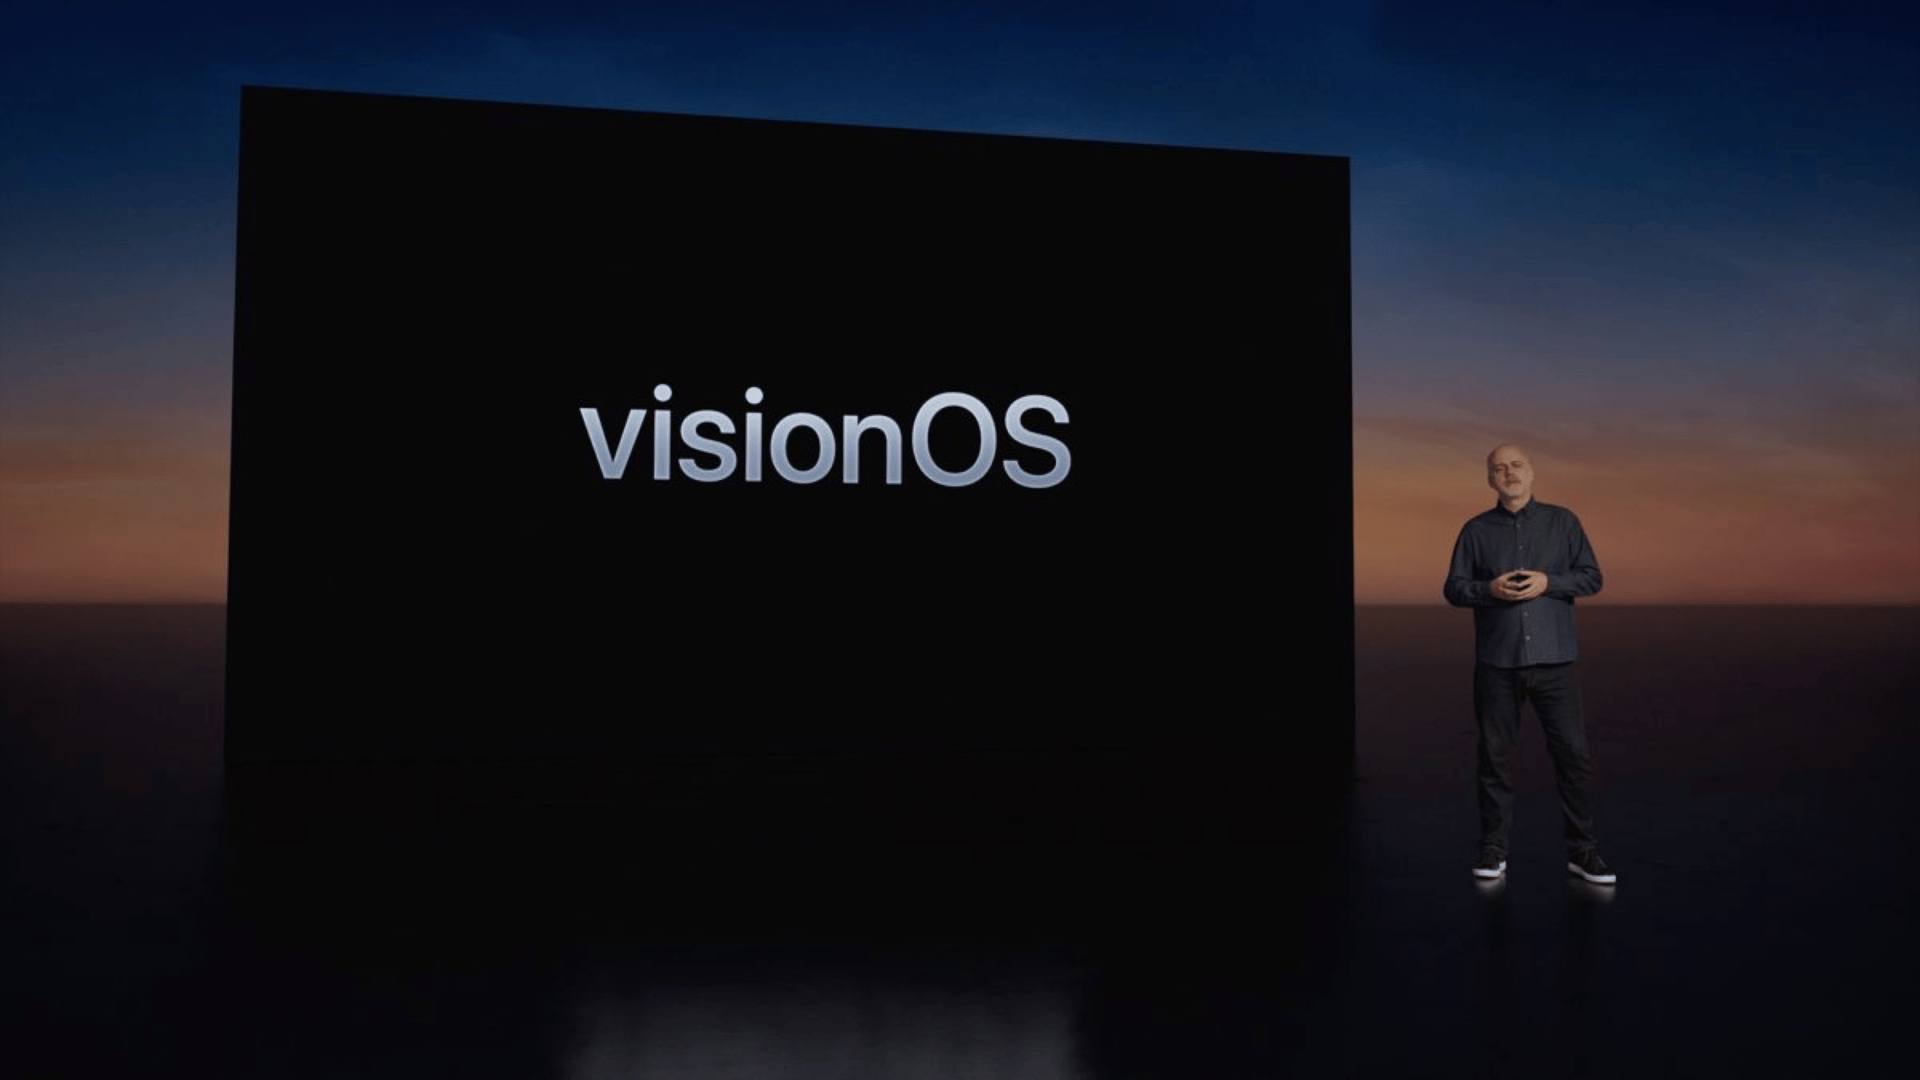 Apple, Vision Pro, AR, augmented reality, headset, visionOS, WWDC, design, features, ski goggles, chassis, interchangeable bands, dial, tightness, Zeiss, magnetic lenses, prescription wearers, battery pack, wire, power source, displays, pixels, 3D lens, UI, HDR, wide color, IR cameras, downward-facing cameras, lidar sensors, R1 chip, EyeSight, real-time subsystem, spatial computing, MacOS, iOS, Unity apps, Adobe, Lightroom, Microsoft, Office, medical software, engineering app, three-dimensional interface, natural light, shadows, immersive experience, interaction, control, voice commands, spatial audio, privacy, security, data protection, future advancements, display technology, battery life, processing power, developers, entertainment, gaming, education, healthcare, industries, revolutionize, conclusion, blog topic, technology, user interface, sensors, lenses, battery, power, display, resolution, UI design, camera tracking, hand tracking, object tracking, chip, real-time processing, spatial awareness, app development, software, compatibility, privacy features, security measures, updates, encryption, innovation, collaboration, possibilities, everyday life, authenticity, plagiarism, review, editing, publishing, website, command, AI assistant, user experience, customization, virtual content, high resolution, comfort, immersive interactions, realistic image, precision, ease, input options, privacy-focused, secure, continuous innovation, integration, audio, auditory environment, anatomy visualization, physics phenomena, future iterations, display advancements, lightweight, immersive AR, seamless integration, industry-leading privacy, user data protection, spatial computing ecosystem, industry collaborations, virtual objects, digital content, personalized experiences, realistic rendering, AR gaming, productivity tools, professional applications, educational simulations, healthcare diagnostics, industrial training, environmental mapping, spatial mapping, content creation, virtual meetings, social experiences, cutting-edge technology, AR revolution, immersive storytelling, gesture recognition, virtual fashion, interactive art, architectural visualization, experiential marketing, wearable technology, AI integration, smart home integration, facial recognition, haptic feedback, AI assistants integration, augmented productivity, hands-free control, AR development, AR content monetization, enterprise applications, interactive learning, 3D modeling, AR advertising, retail experiences, virtual try-on, AR navigation, AR storytelling, object recognition, virtual collaboration, AR data visualization, AR sports experiences, motion tracking, AR gaming controllers.